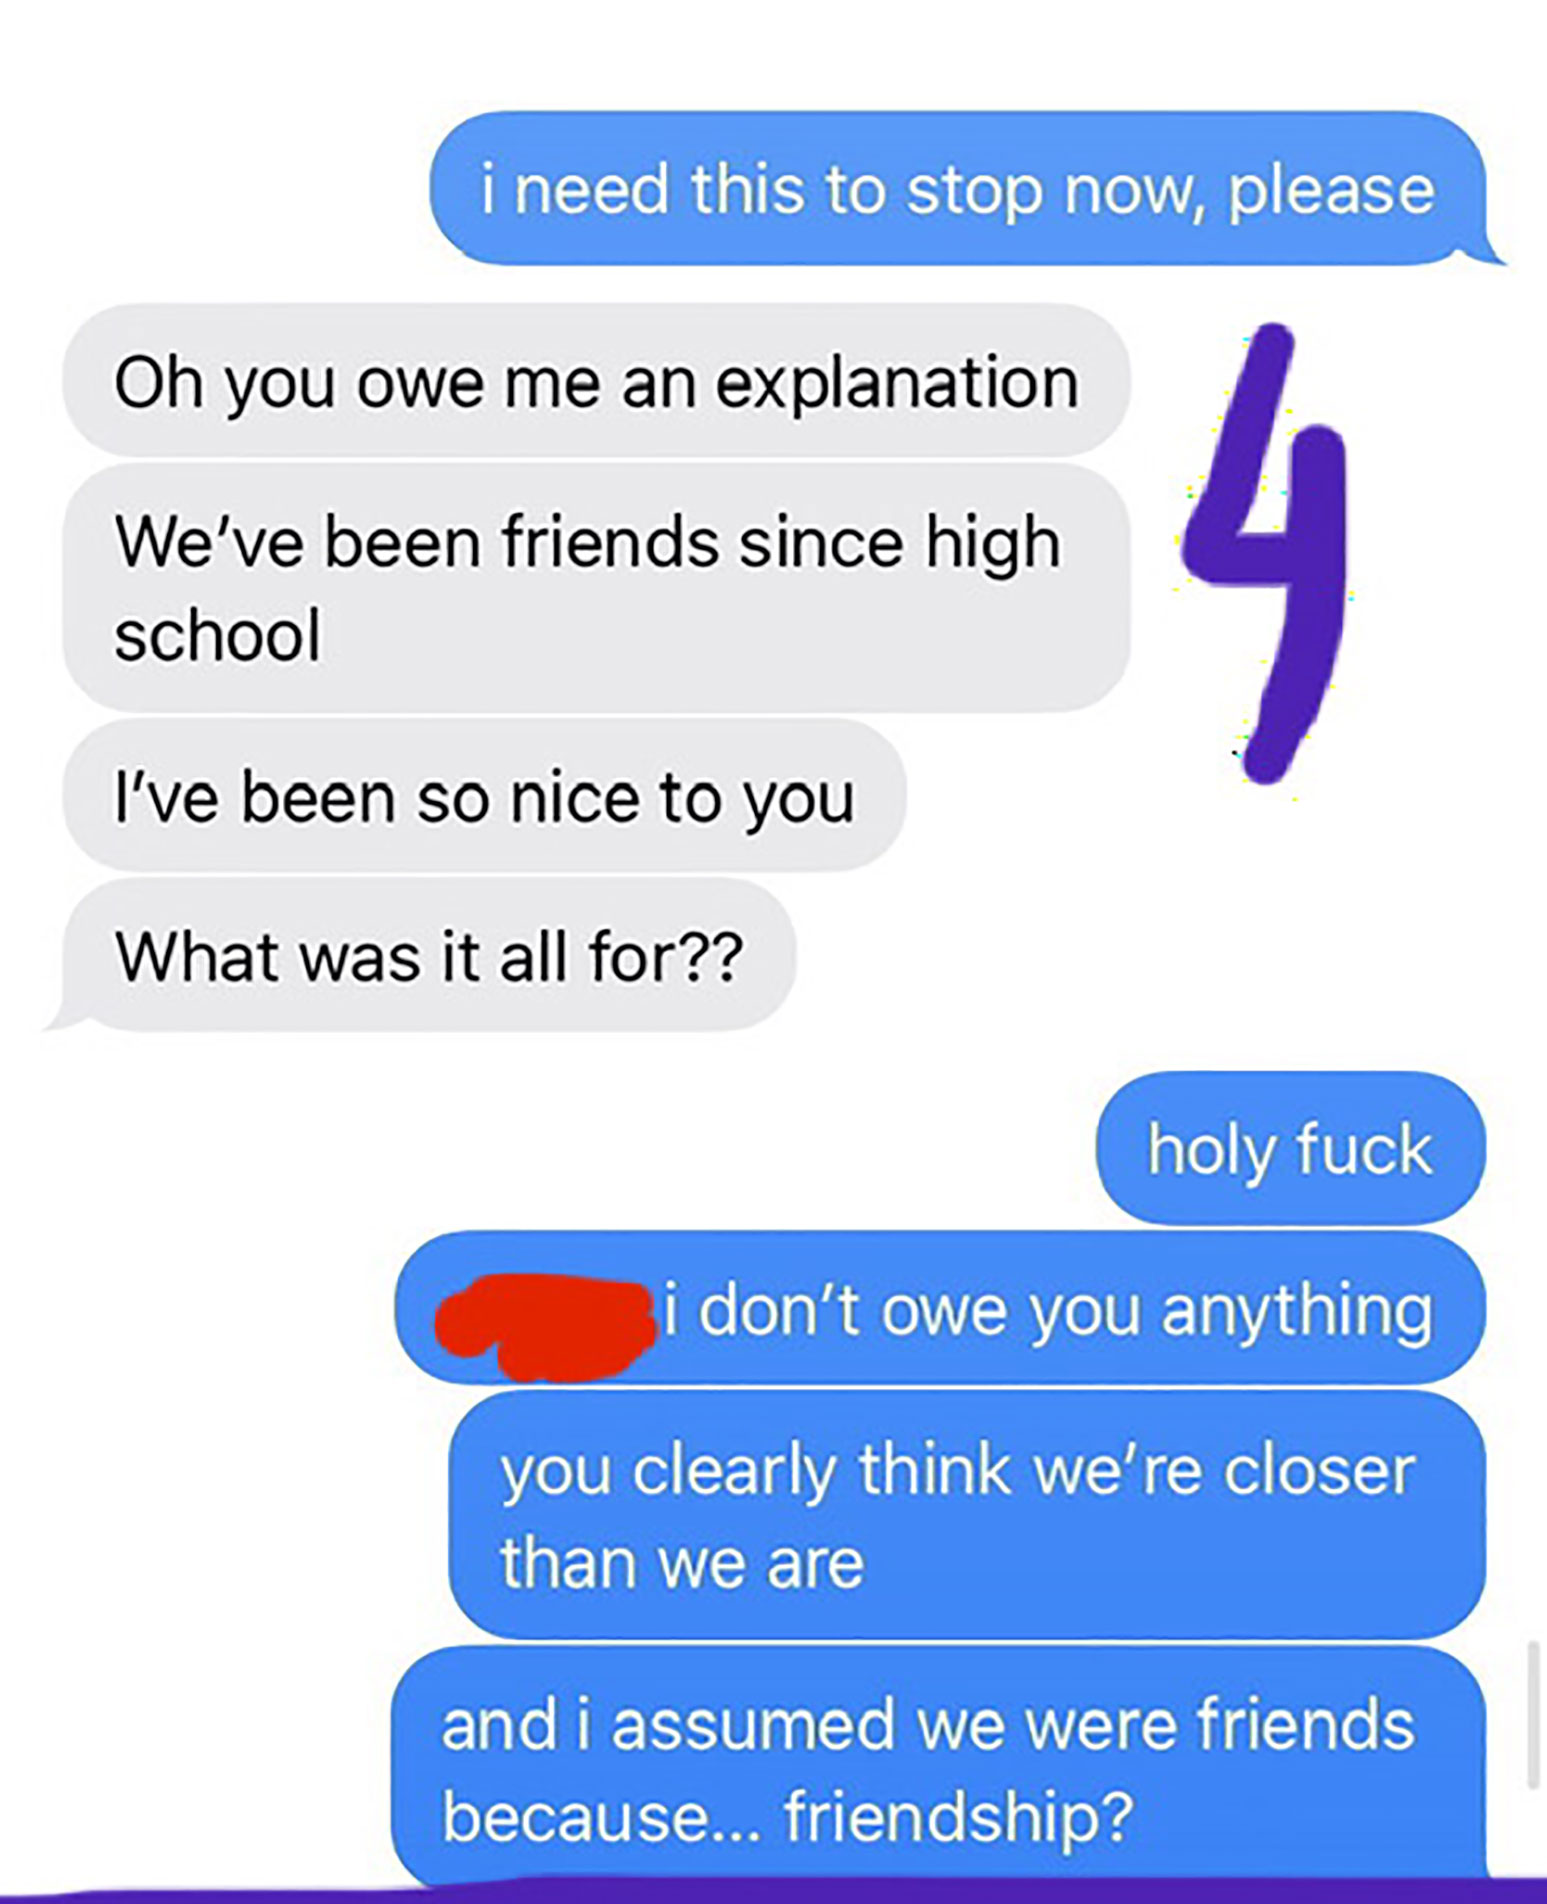 number - i need this to stop now, please Oh you owe me an explanation We've been friends since high school I've been so nice to you What was it all for?? holy fuck i don't owe you anything you clearly think we're closer than we are and i assumed we were f